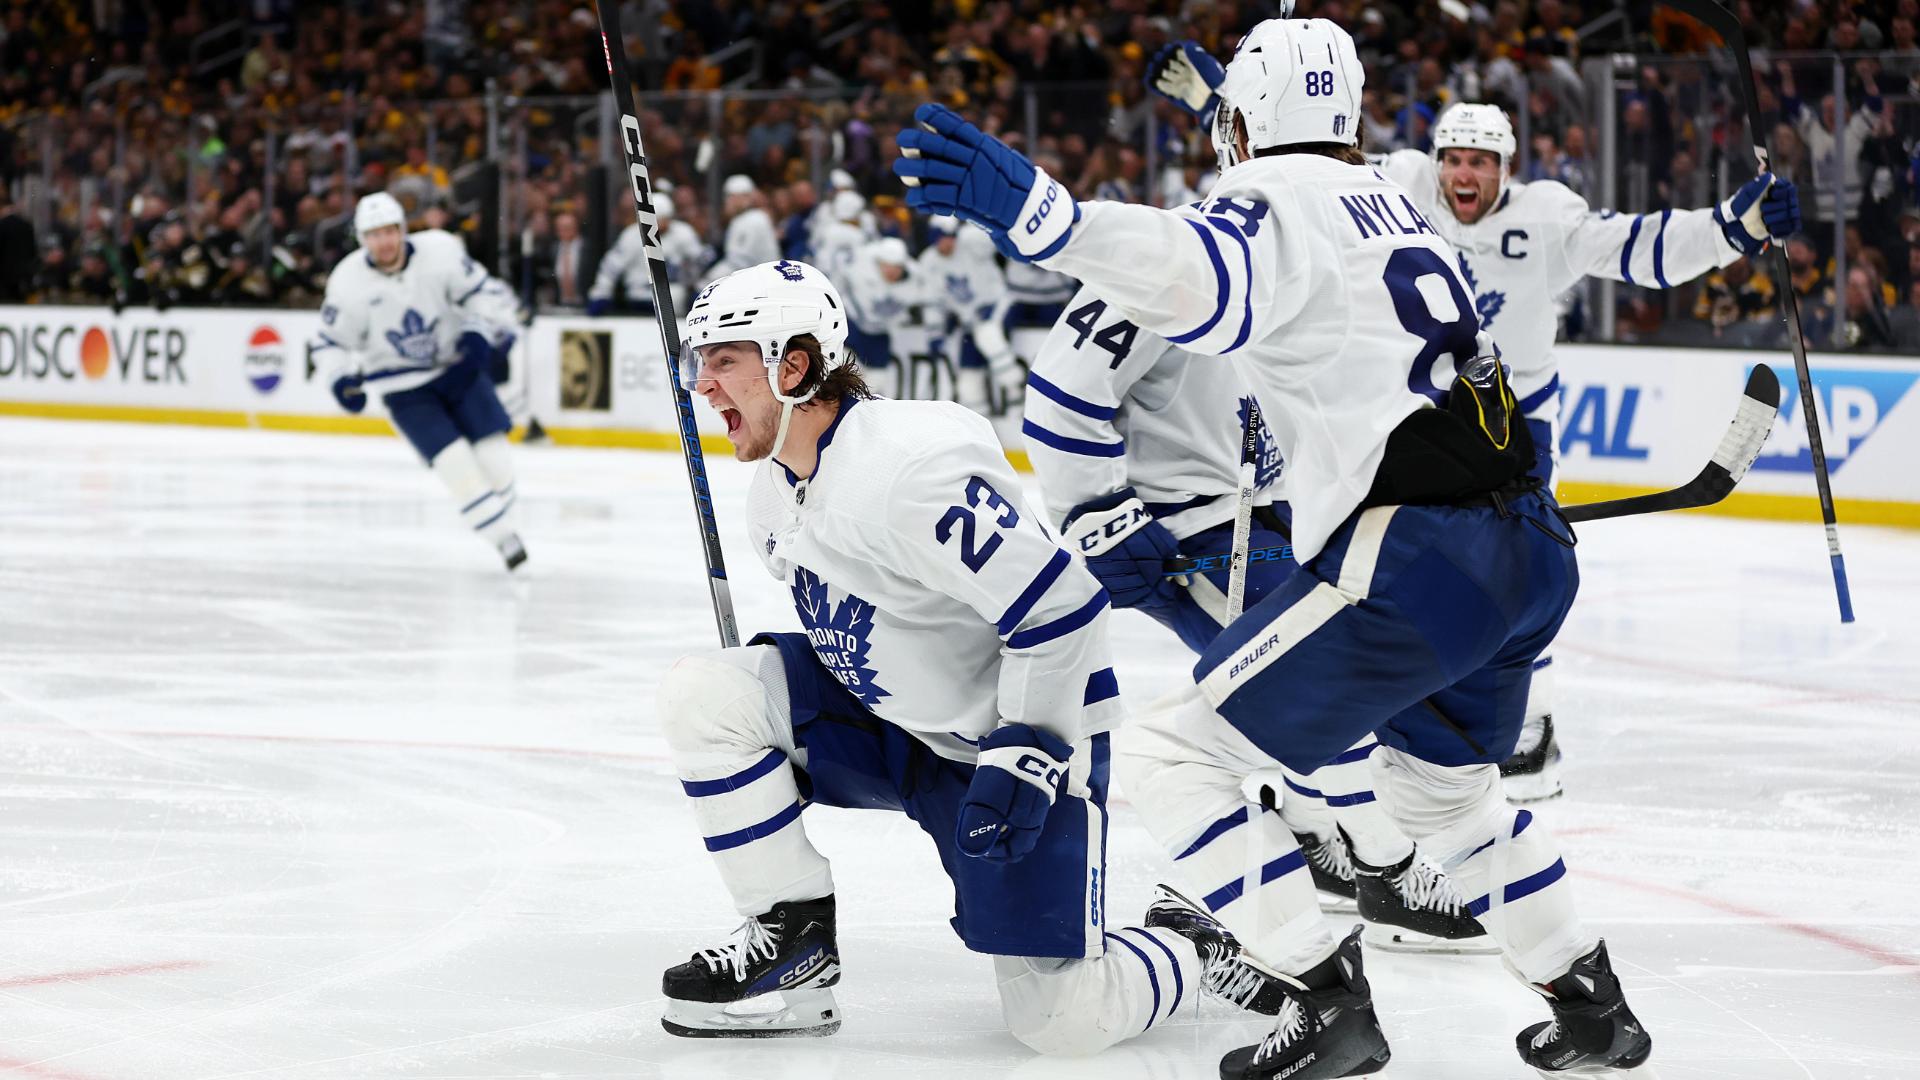 Knies scores in overtime  Matthews-less Maple Leafs avoid elimination with 2-1 win over Bruins